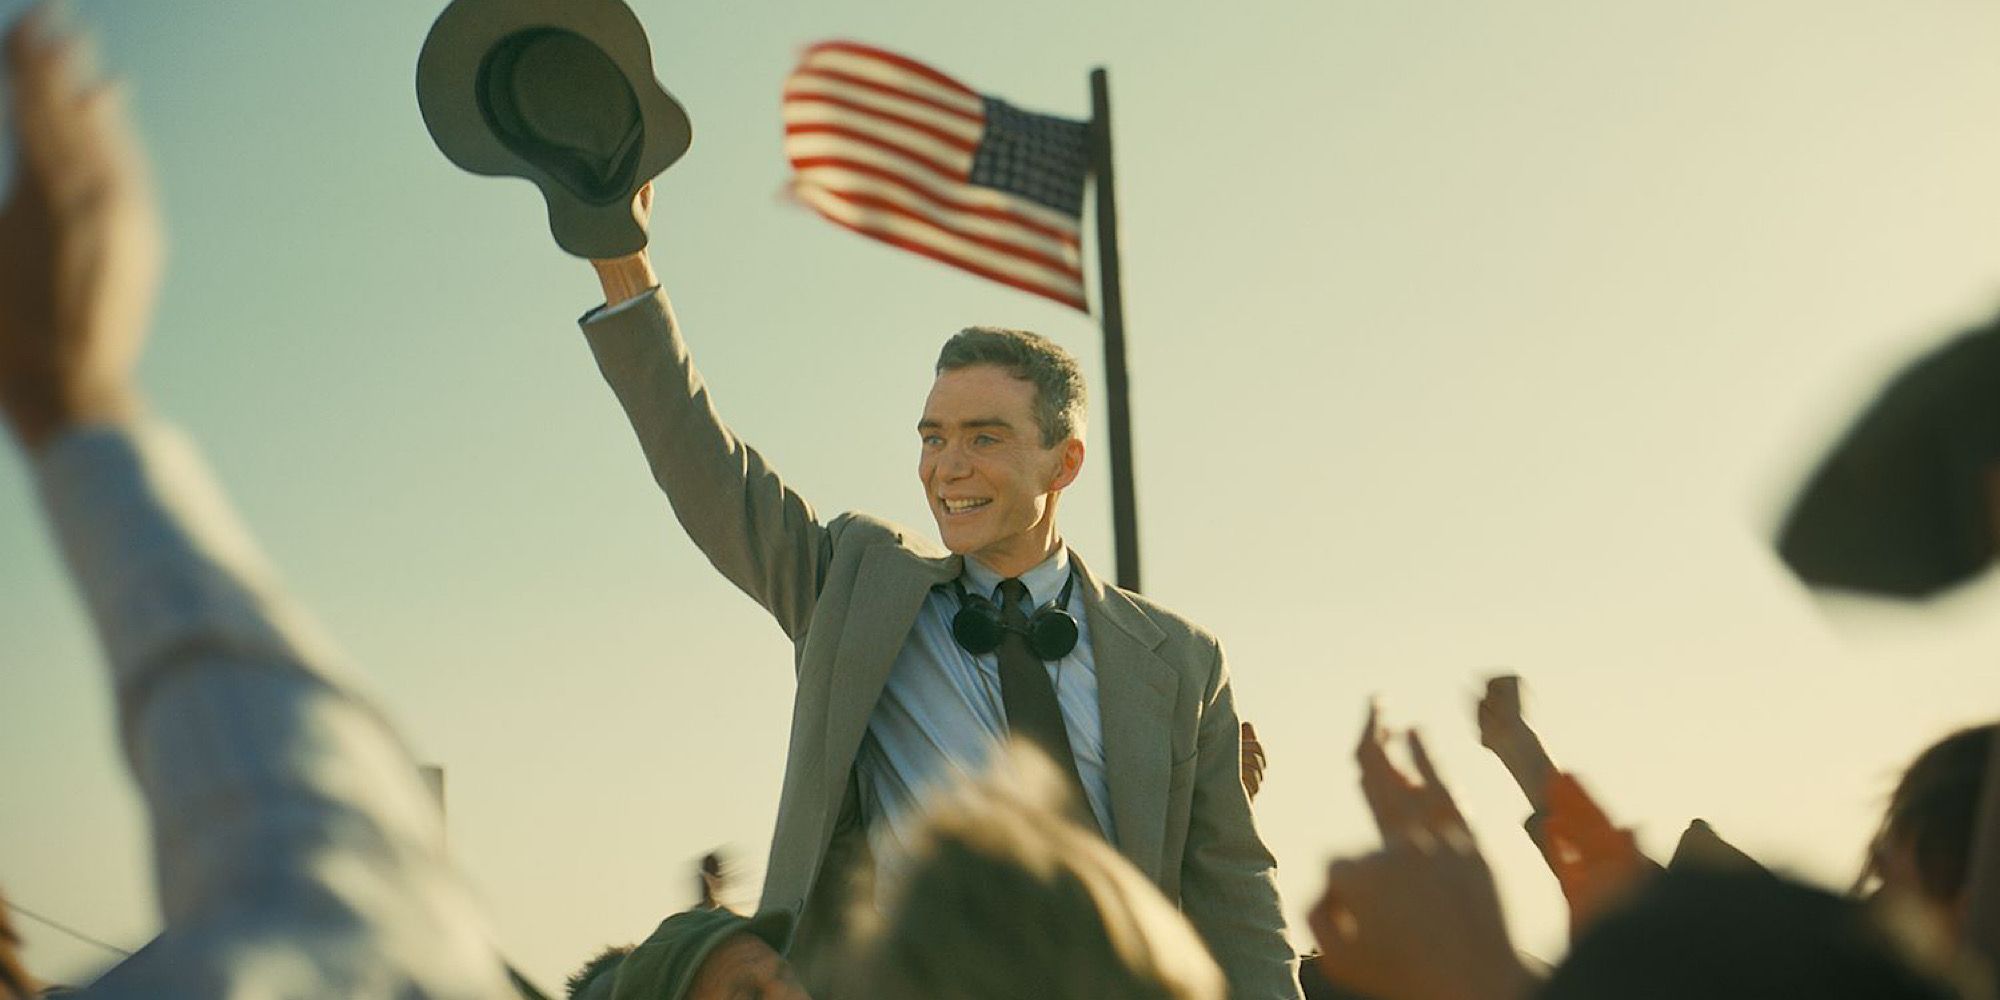 Cillian Murphy as Oppenheimer celebrating above a cheering crowd with the American flag in the background.